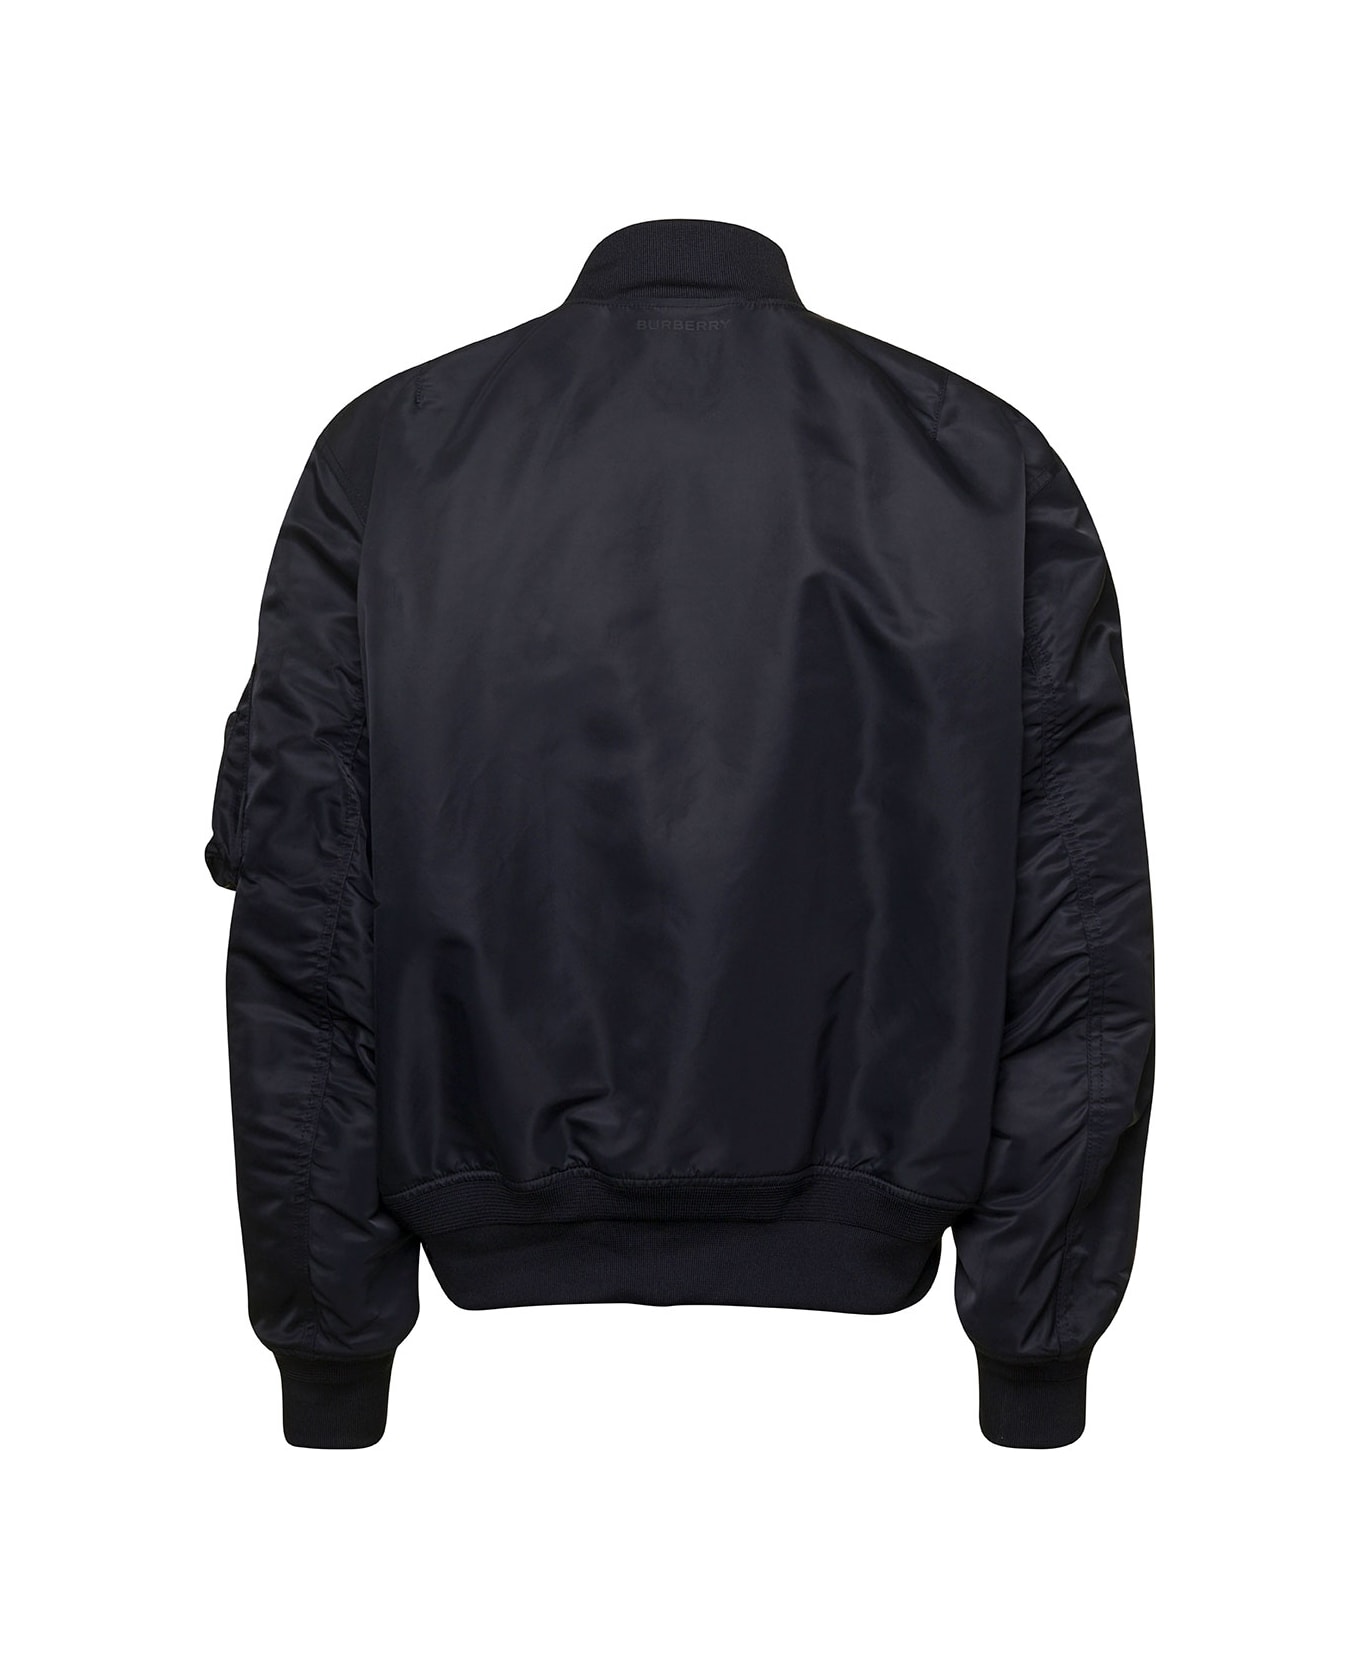 Burberry Black Bomber Jacket With Equestrian Knight Print In Polyamide Stretch Man - Black